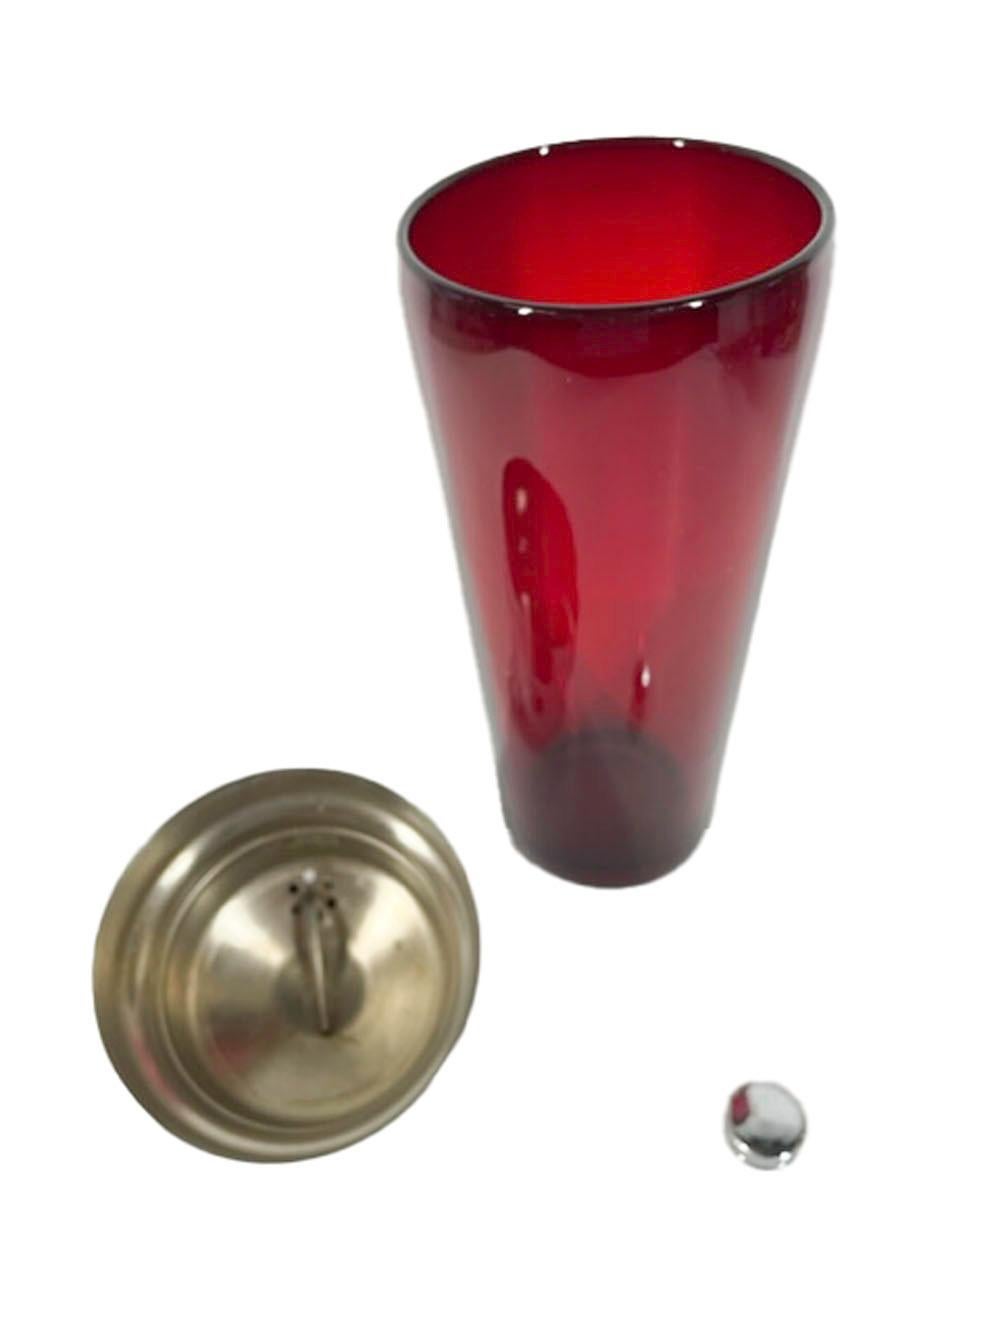 20th Century Art Deco Ruby Red Glass Cocktail Shaker with a Stepped High Dome Chrome Lid